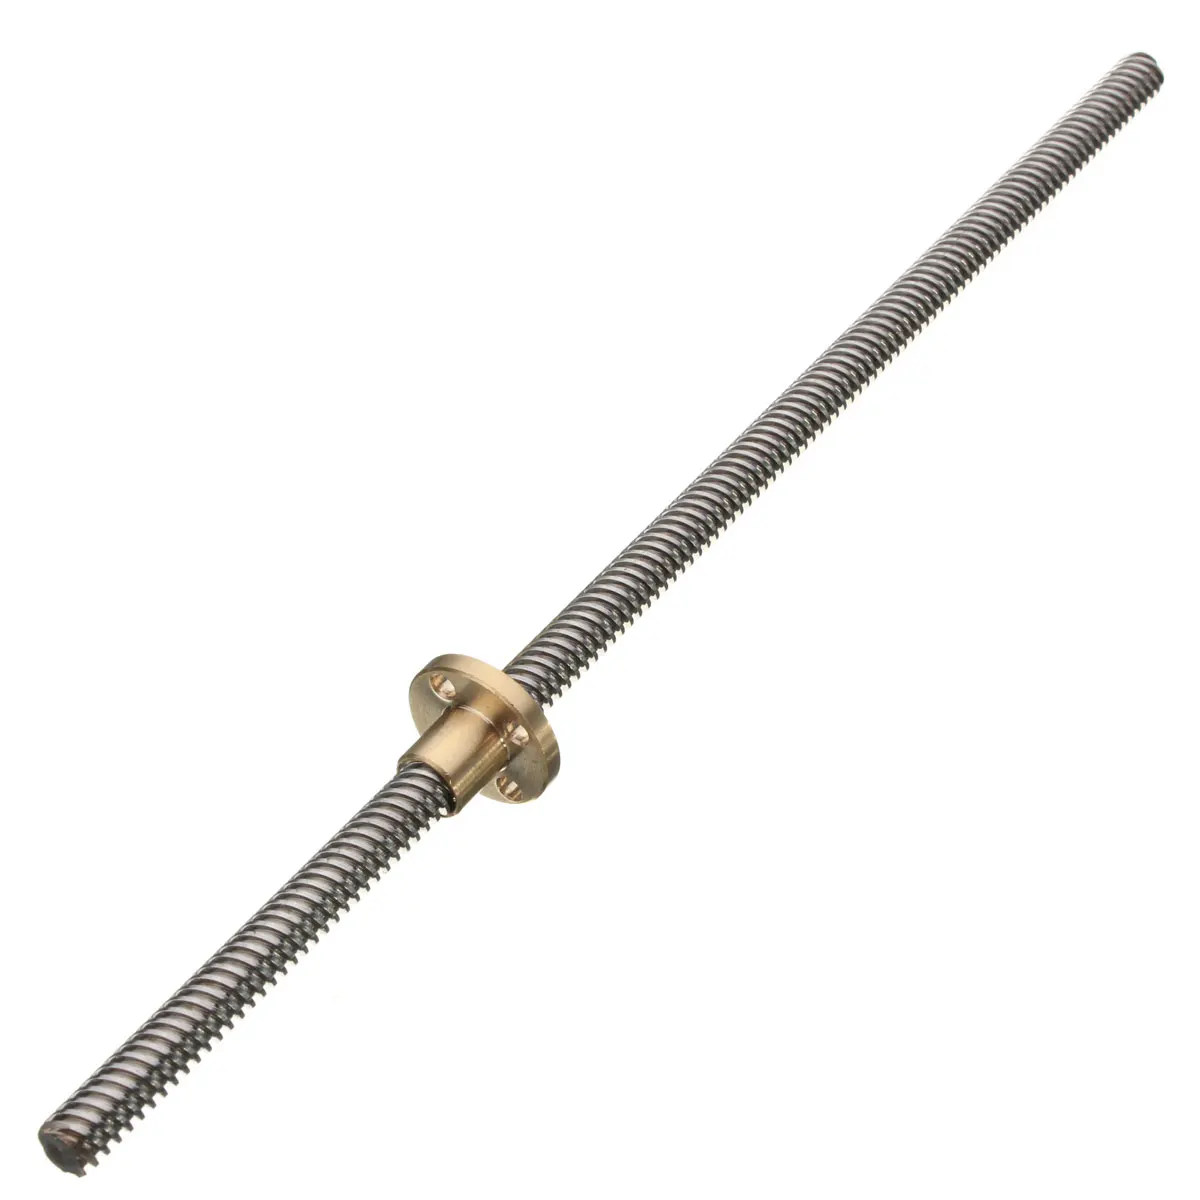 Trapezoidal Spindle Screw T8 Length 250mm Lead Threaded Screw Rod with Brass Copper Nut For 3D Printer Parts 